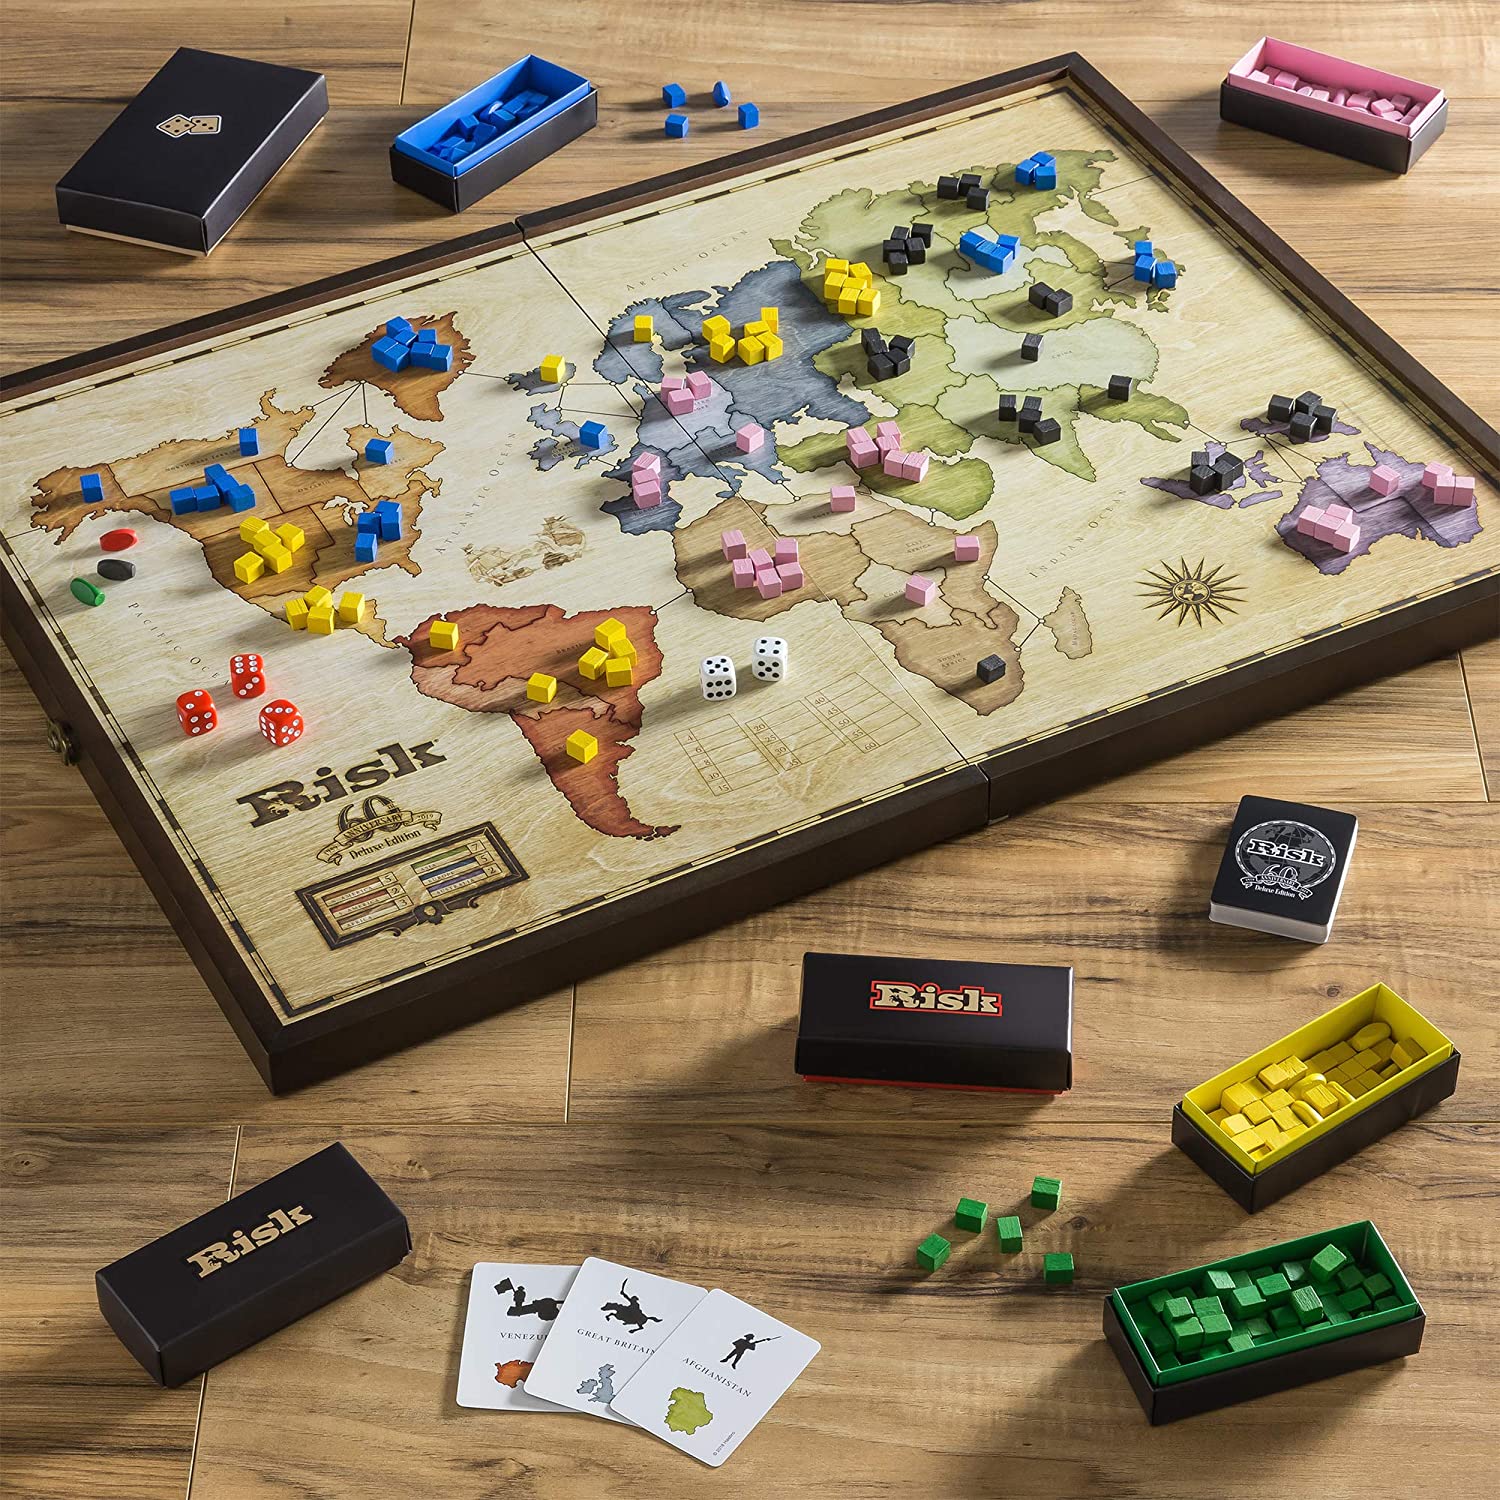 Classic board games that make great gifts